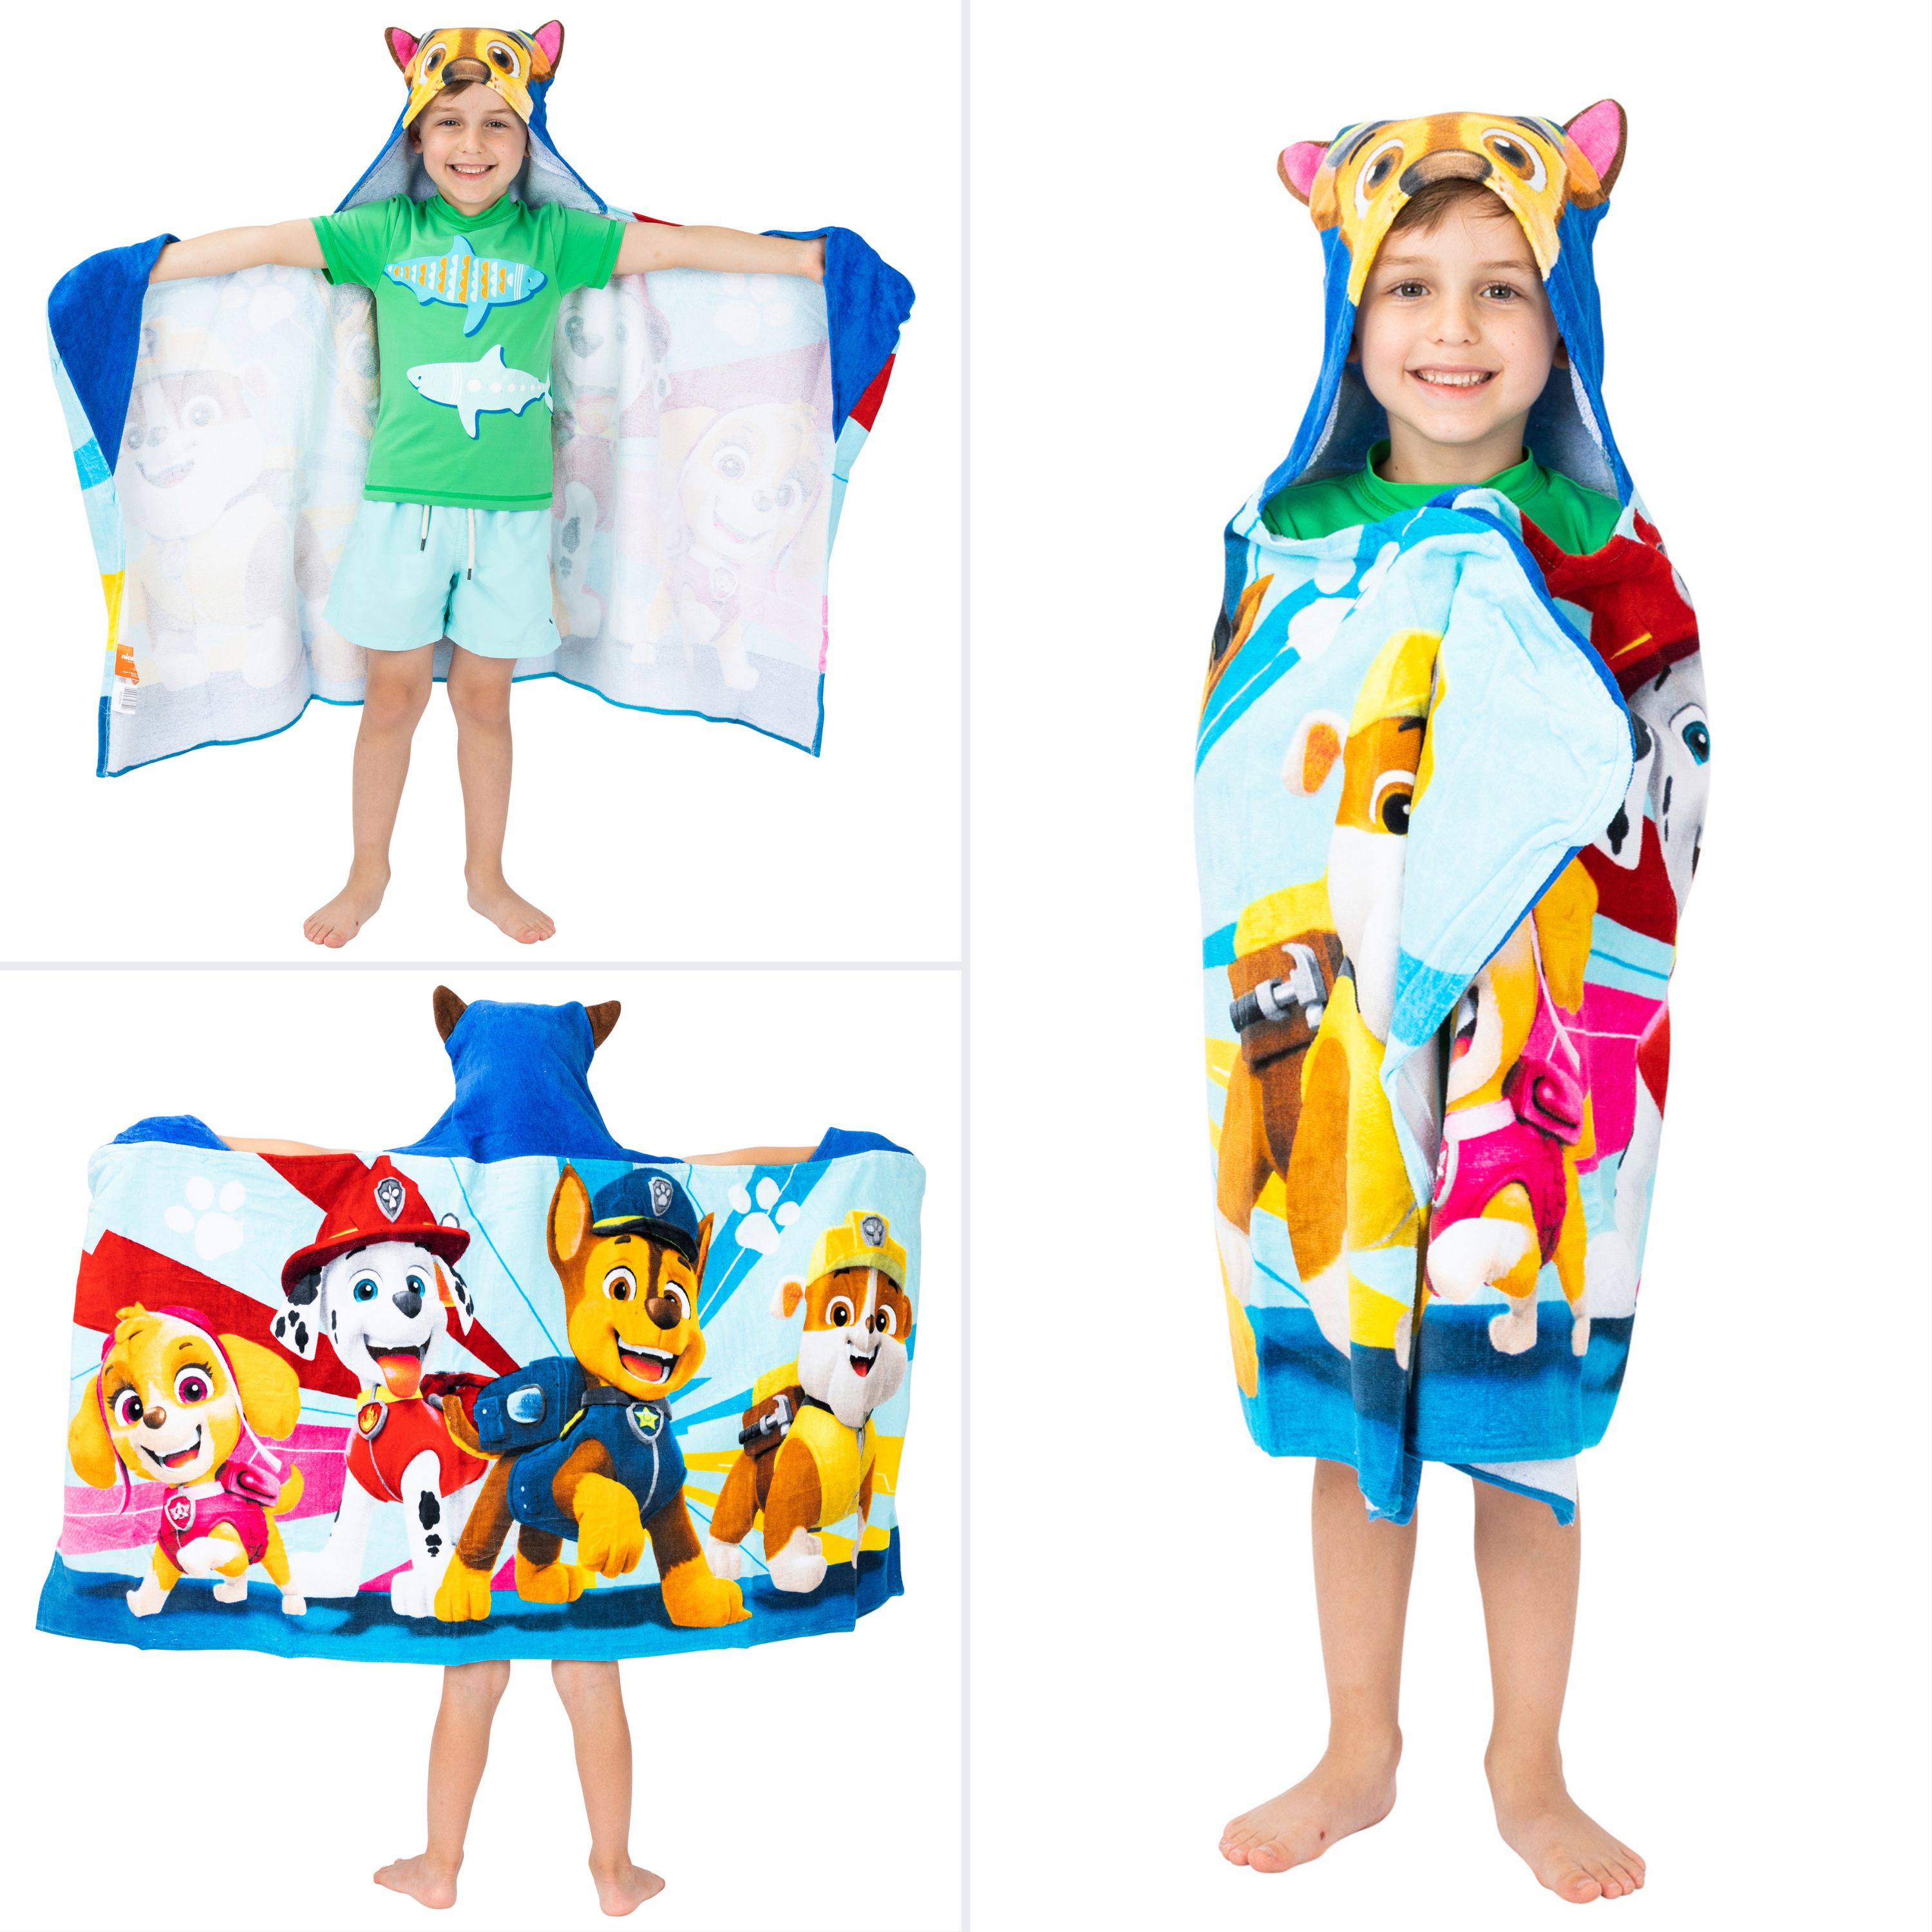 PAW Patrol Chase Kids Cotton Hooded Towel - image 2 of 6